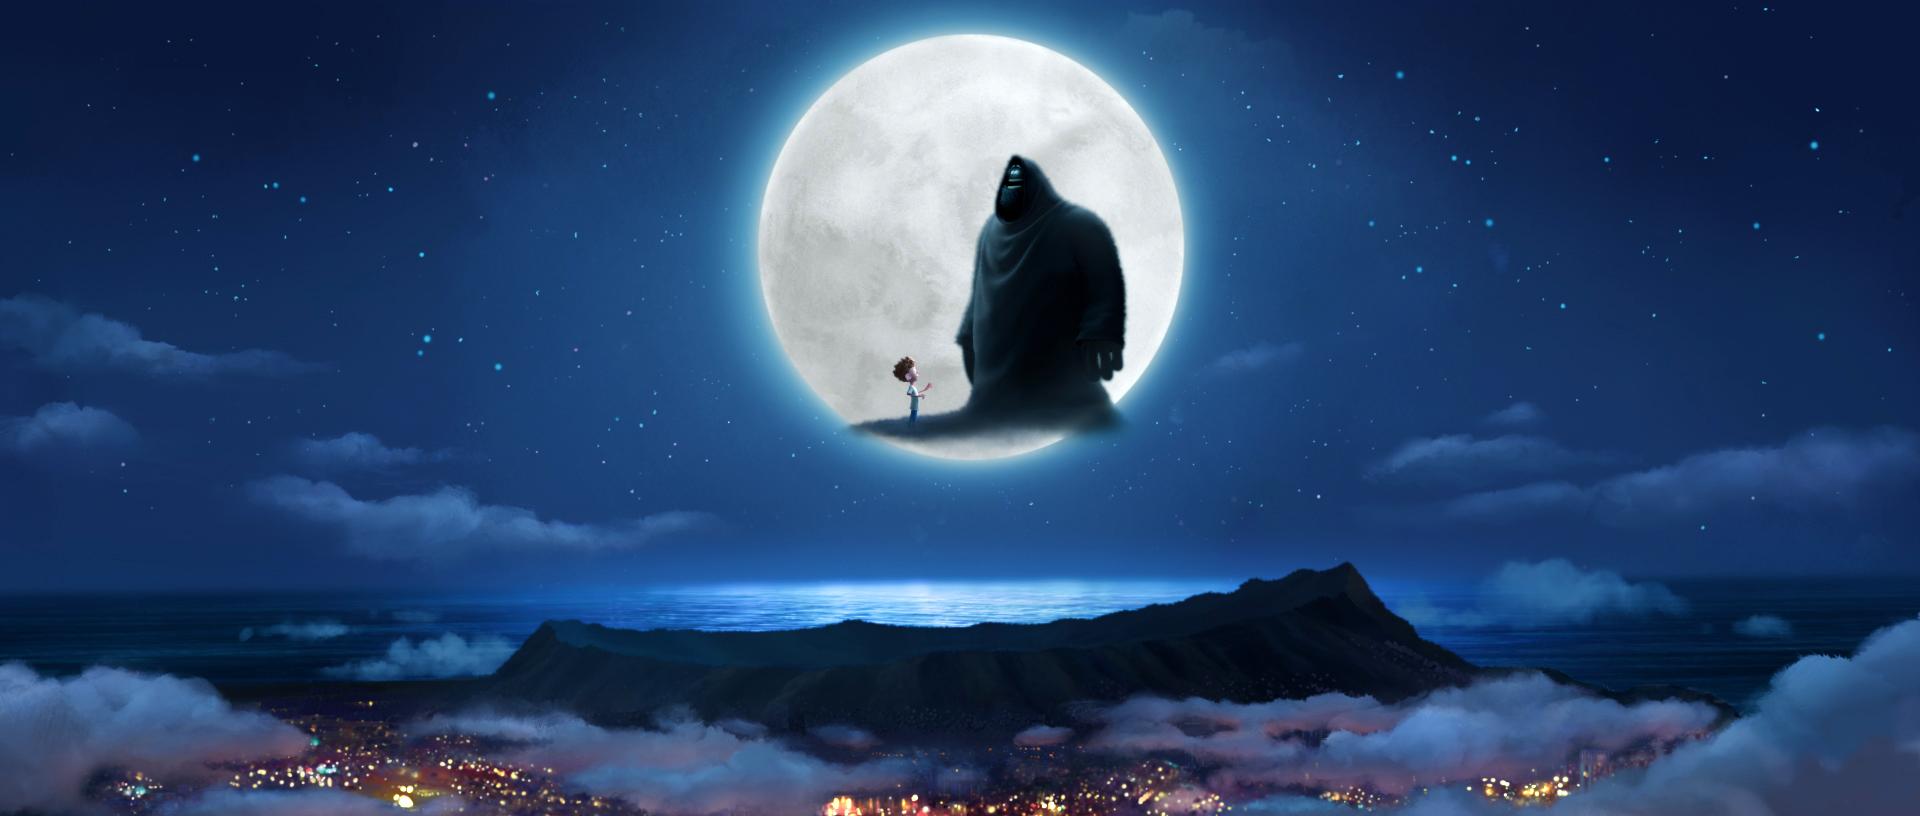 An animated boy and a spirit in front of the moon in this image from DreamWorks Animation.